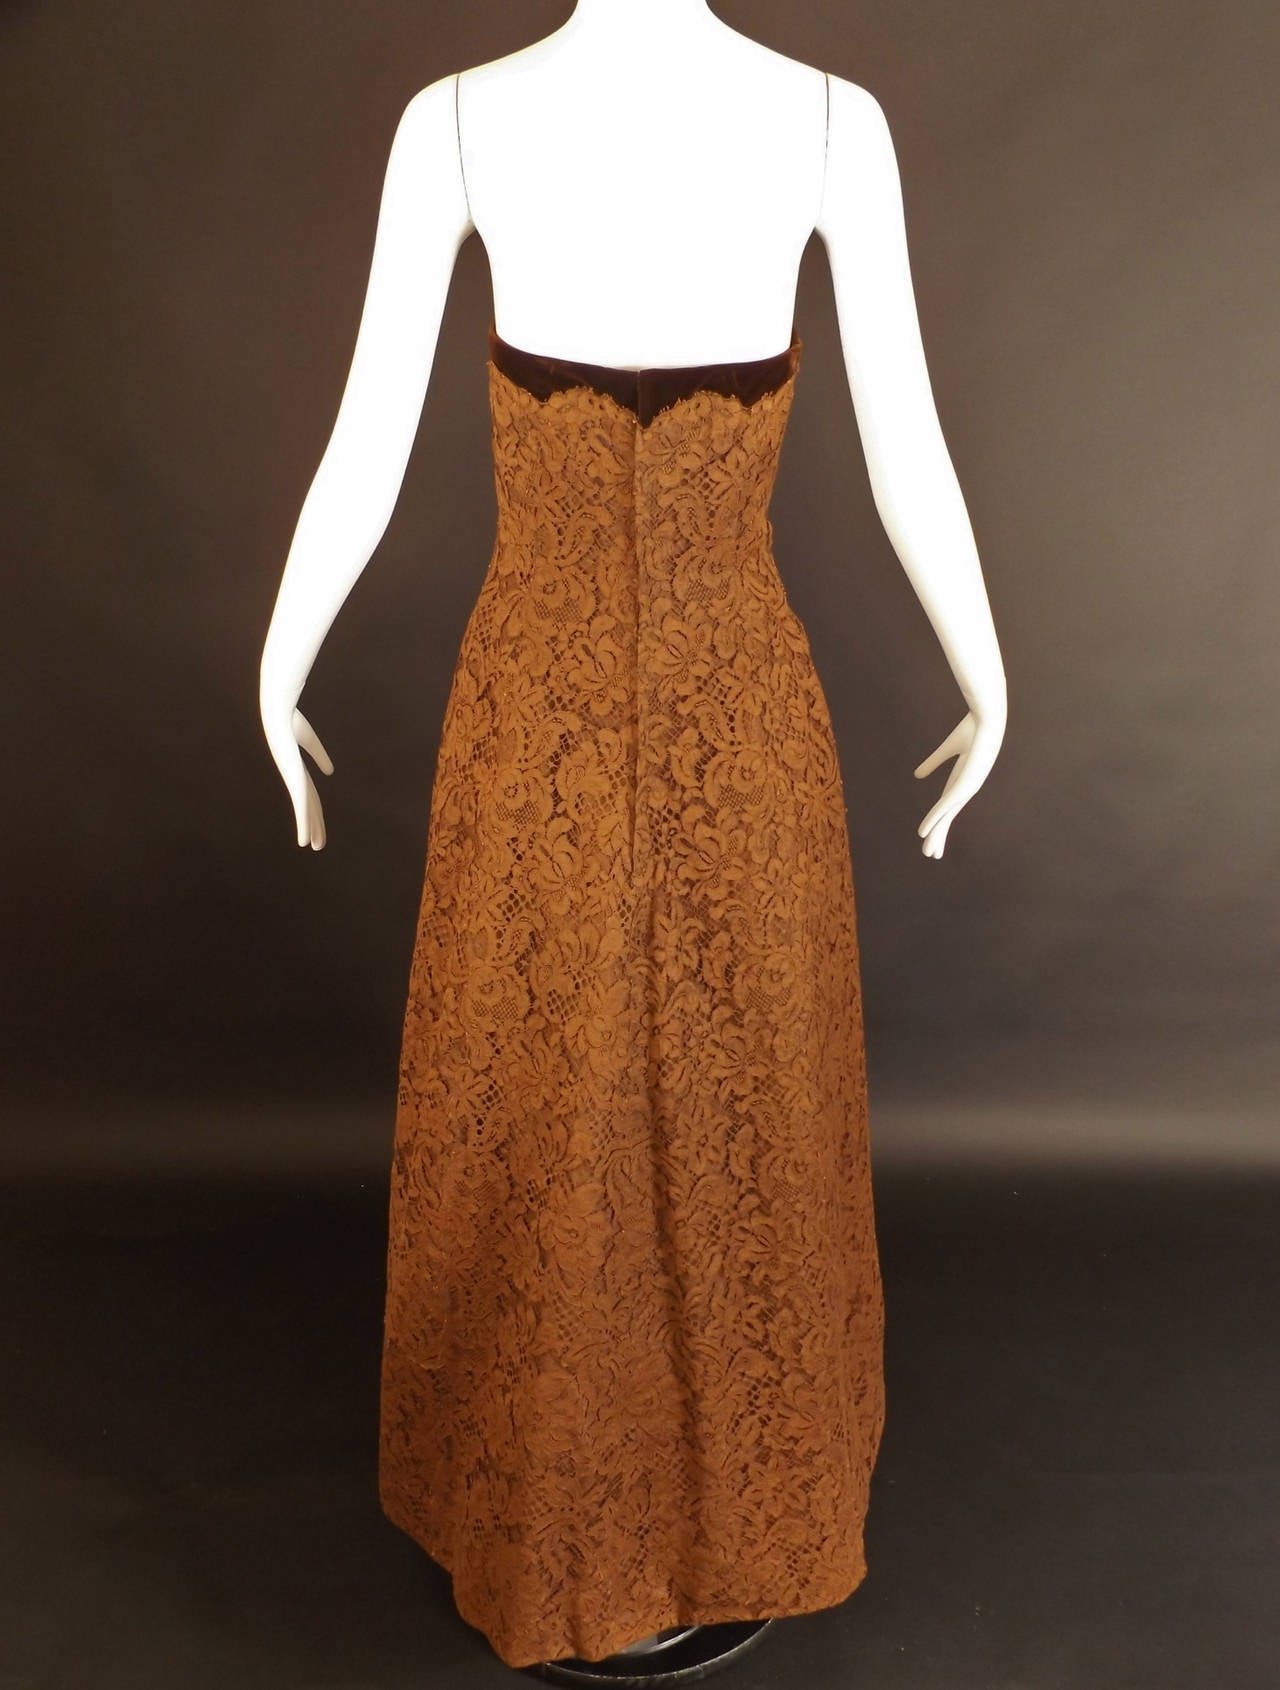 Gorgeous early 1960s evening gown in rows of brown floral lace appliquéd to itself and with a lining in a brown rayon faille.  Brown velveteen edges along the top of the boned bodice and runs down the center front. A large bow adorns the front